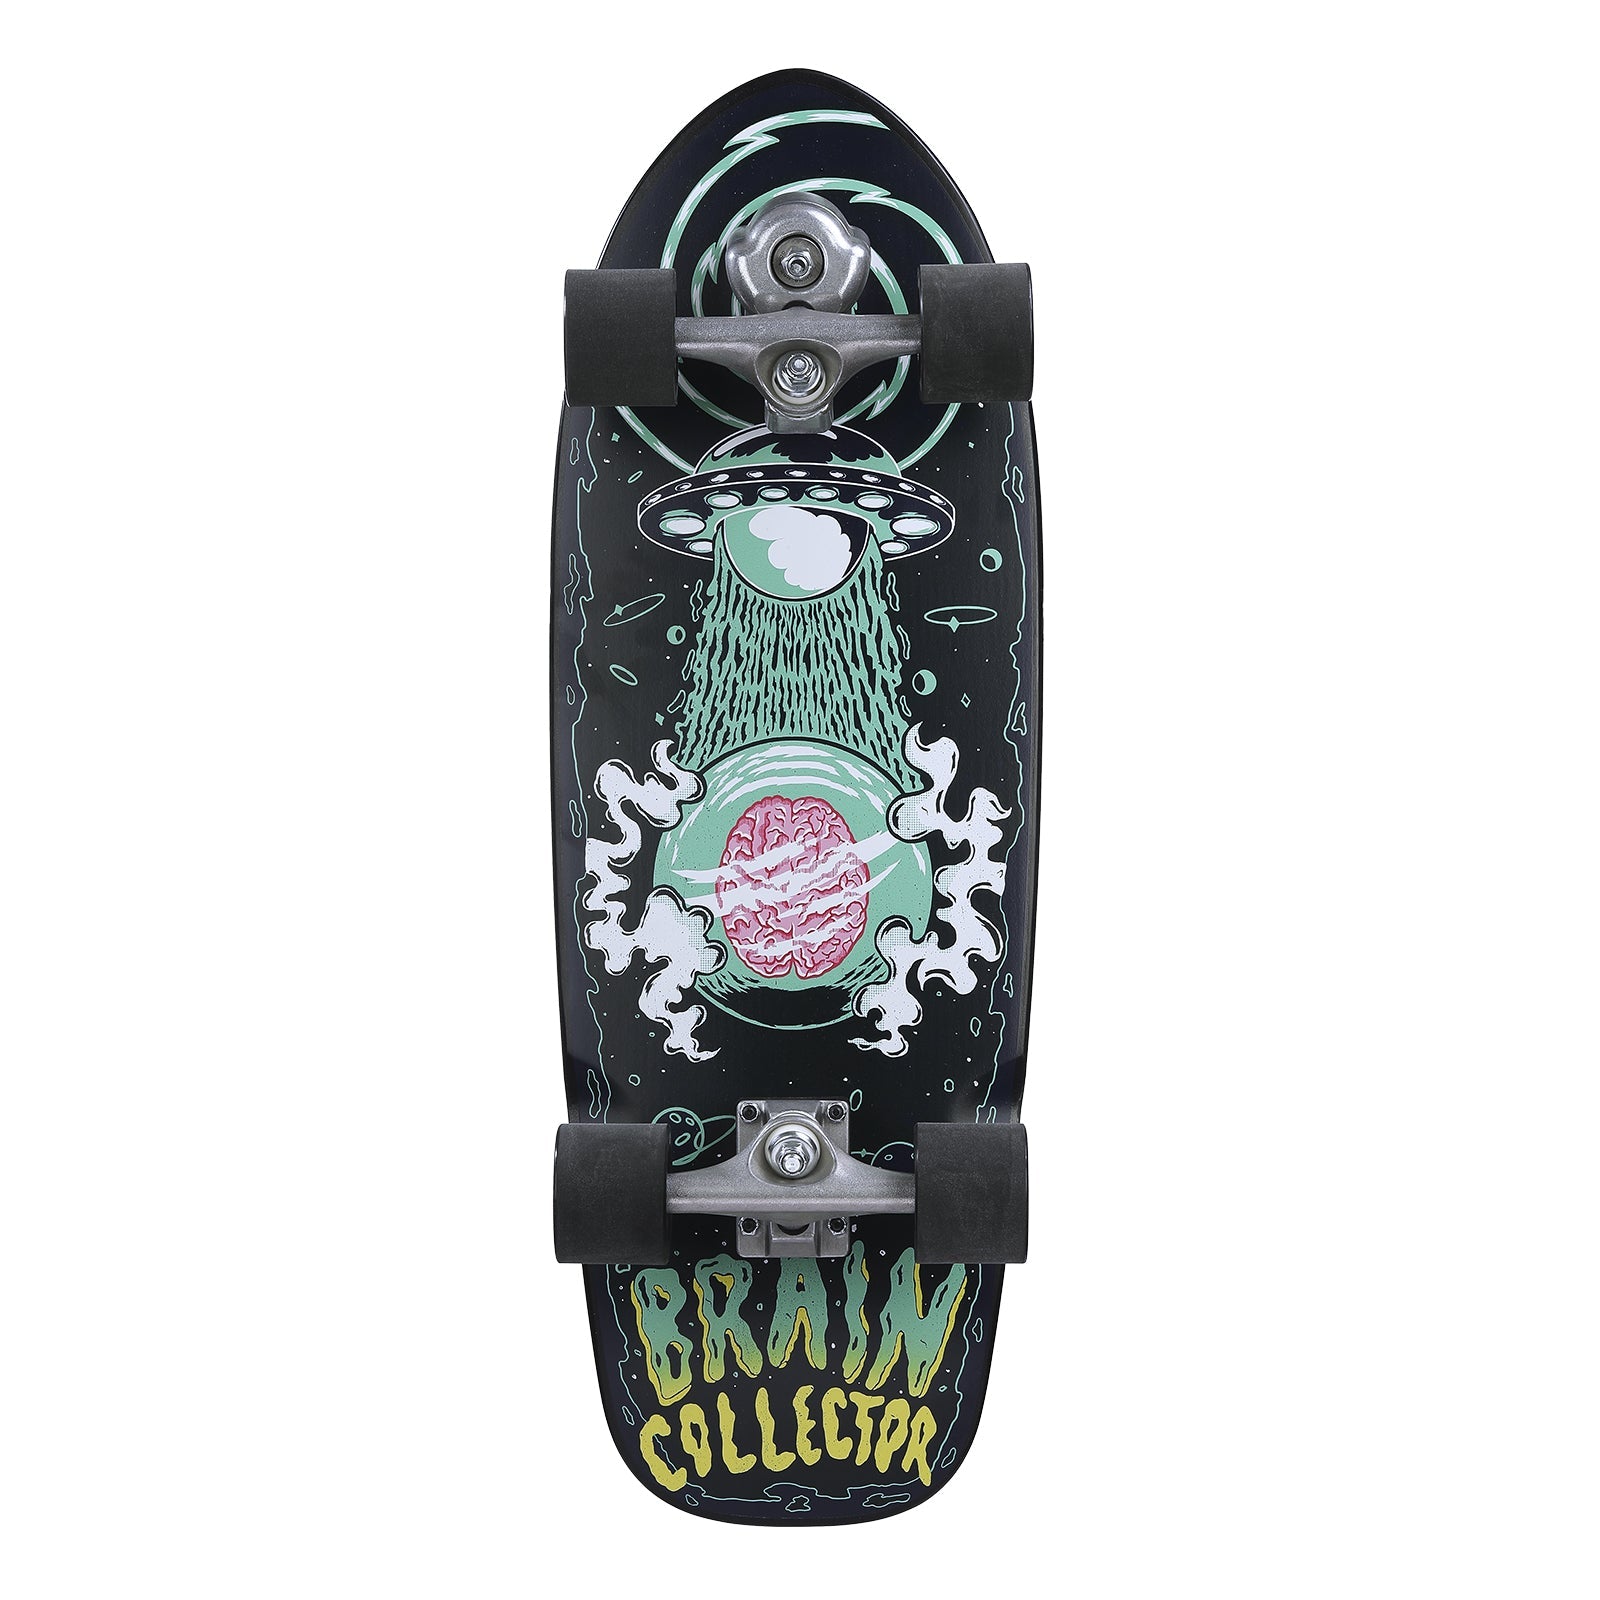 Grand Gopher Surf Skate-Brain Collector Green- 28 Inches (Best Size for Girl)